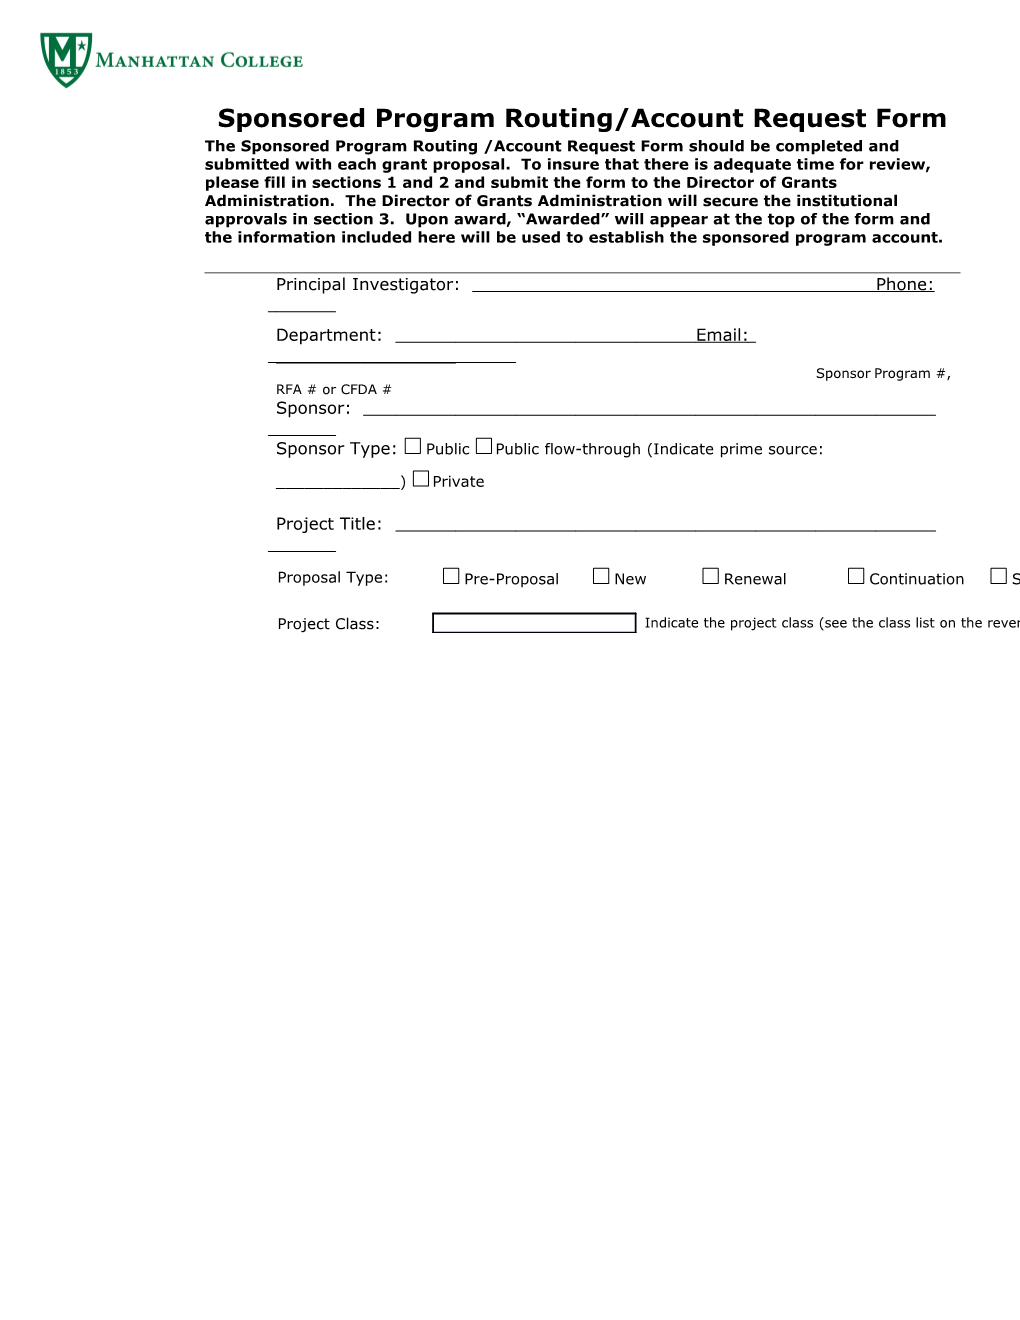 Sponsored Program Routing/Account Request Form